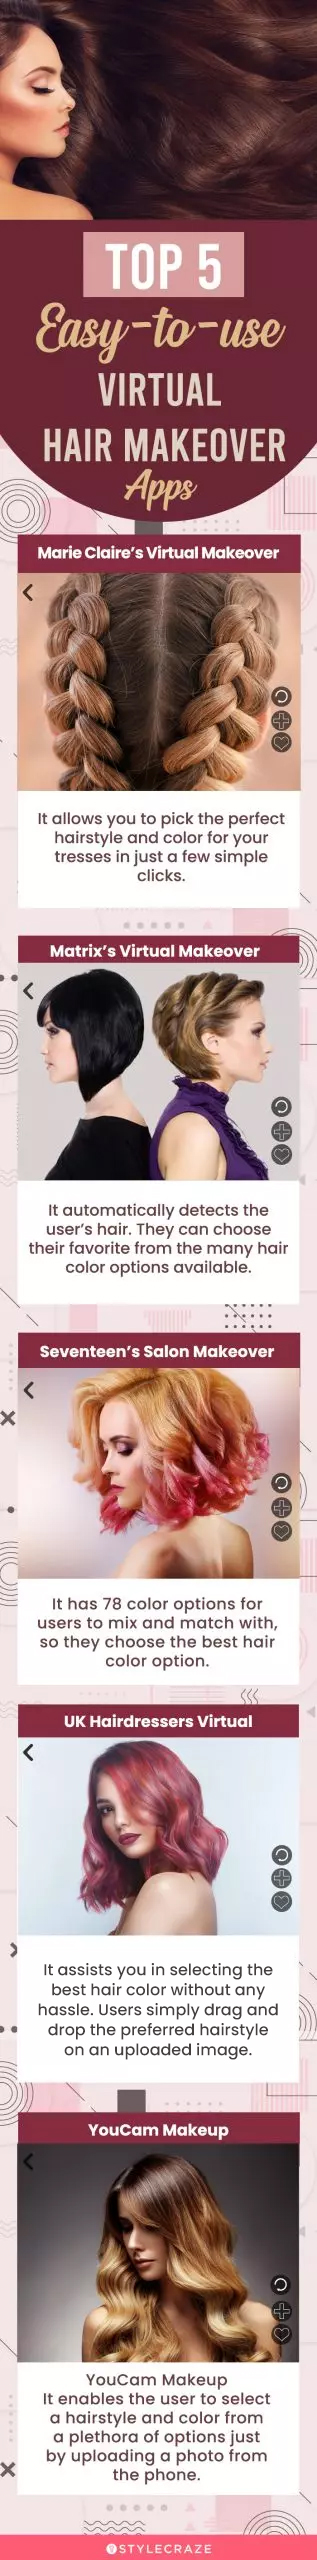 Hairstyle Changer Get Free Virtual Hairstyle Try on with AI  Fotor